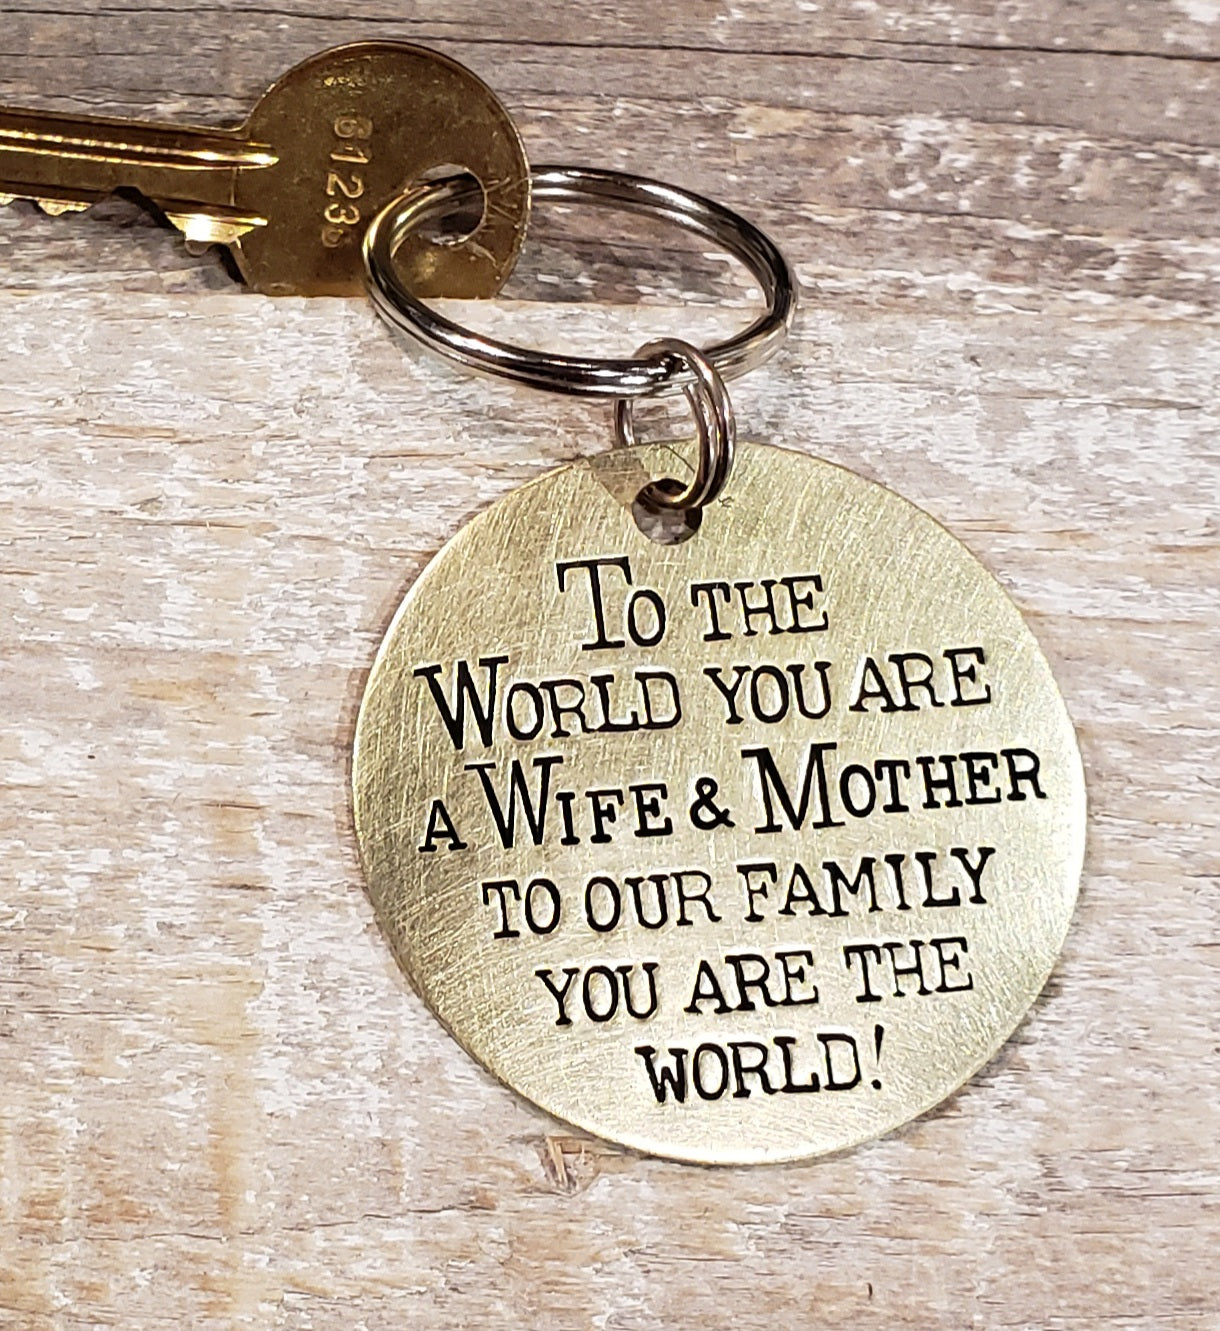 To the World You Are a Wife & Mother - Hand Stamped Brass